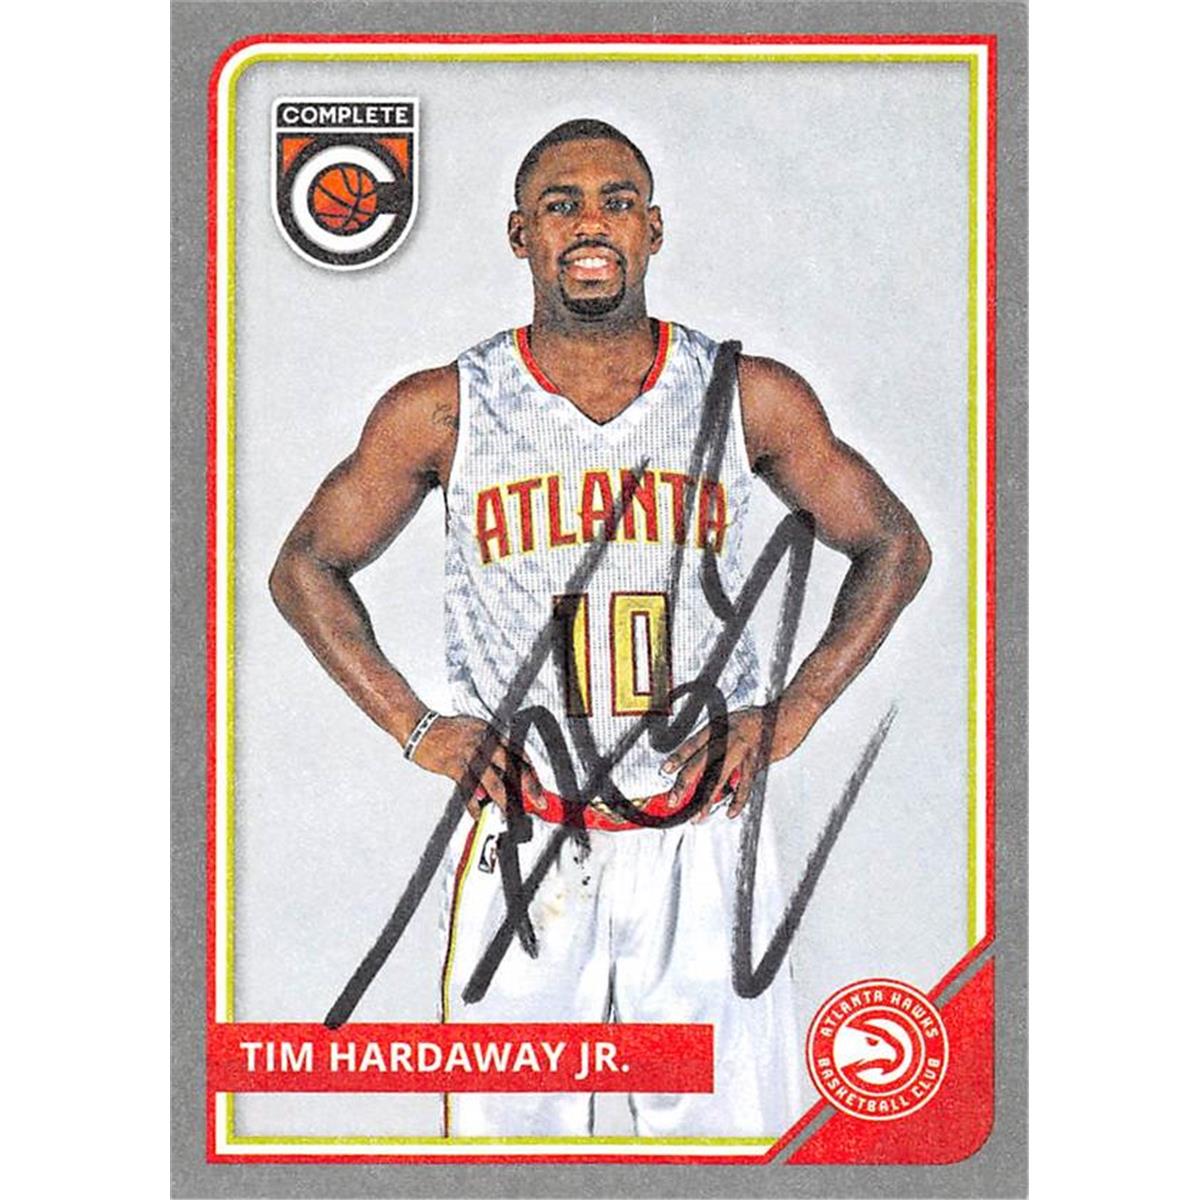 Picture of Autograph Warehouse 444455 Atlanta Hawks 2015 Panini Complete Silver No. 97 Tim Hardaway Jr. Autographed Basketball Card